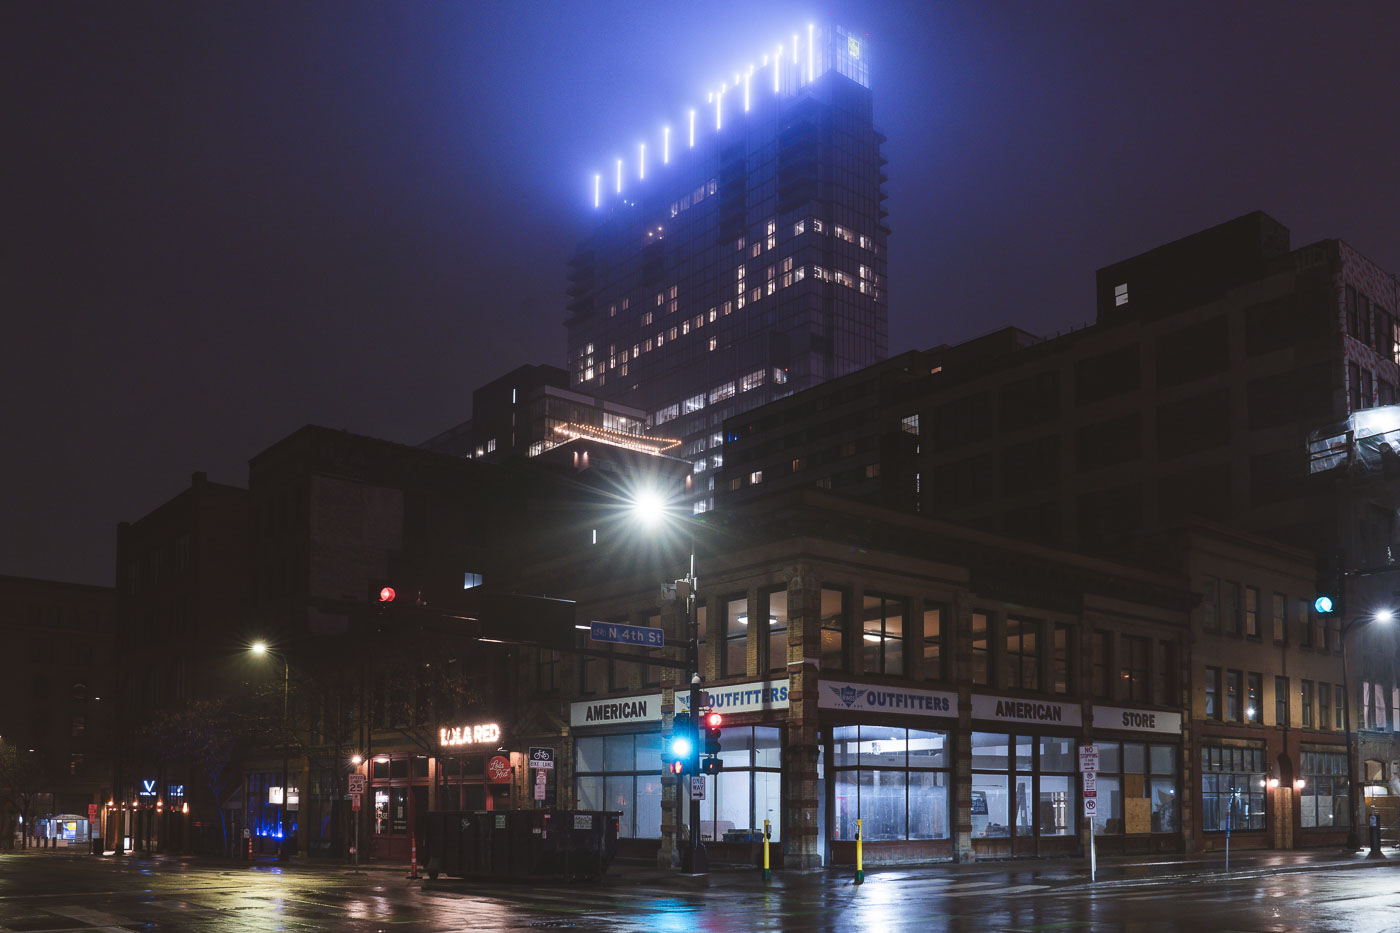 Intersection on rainy night with building in fog